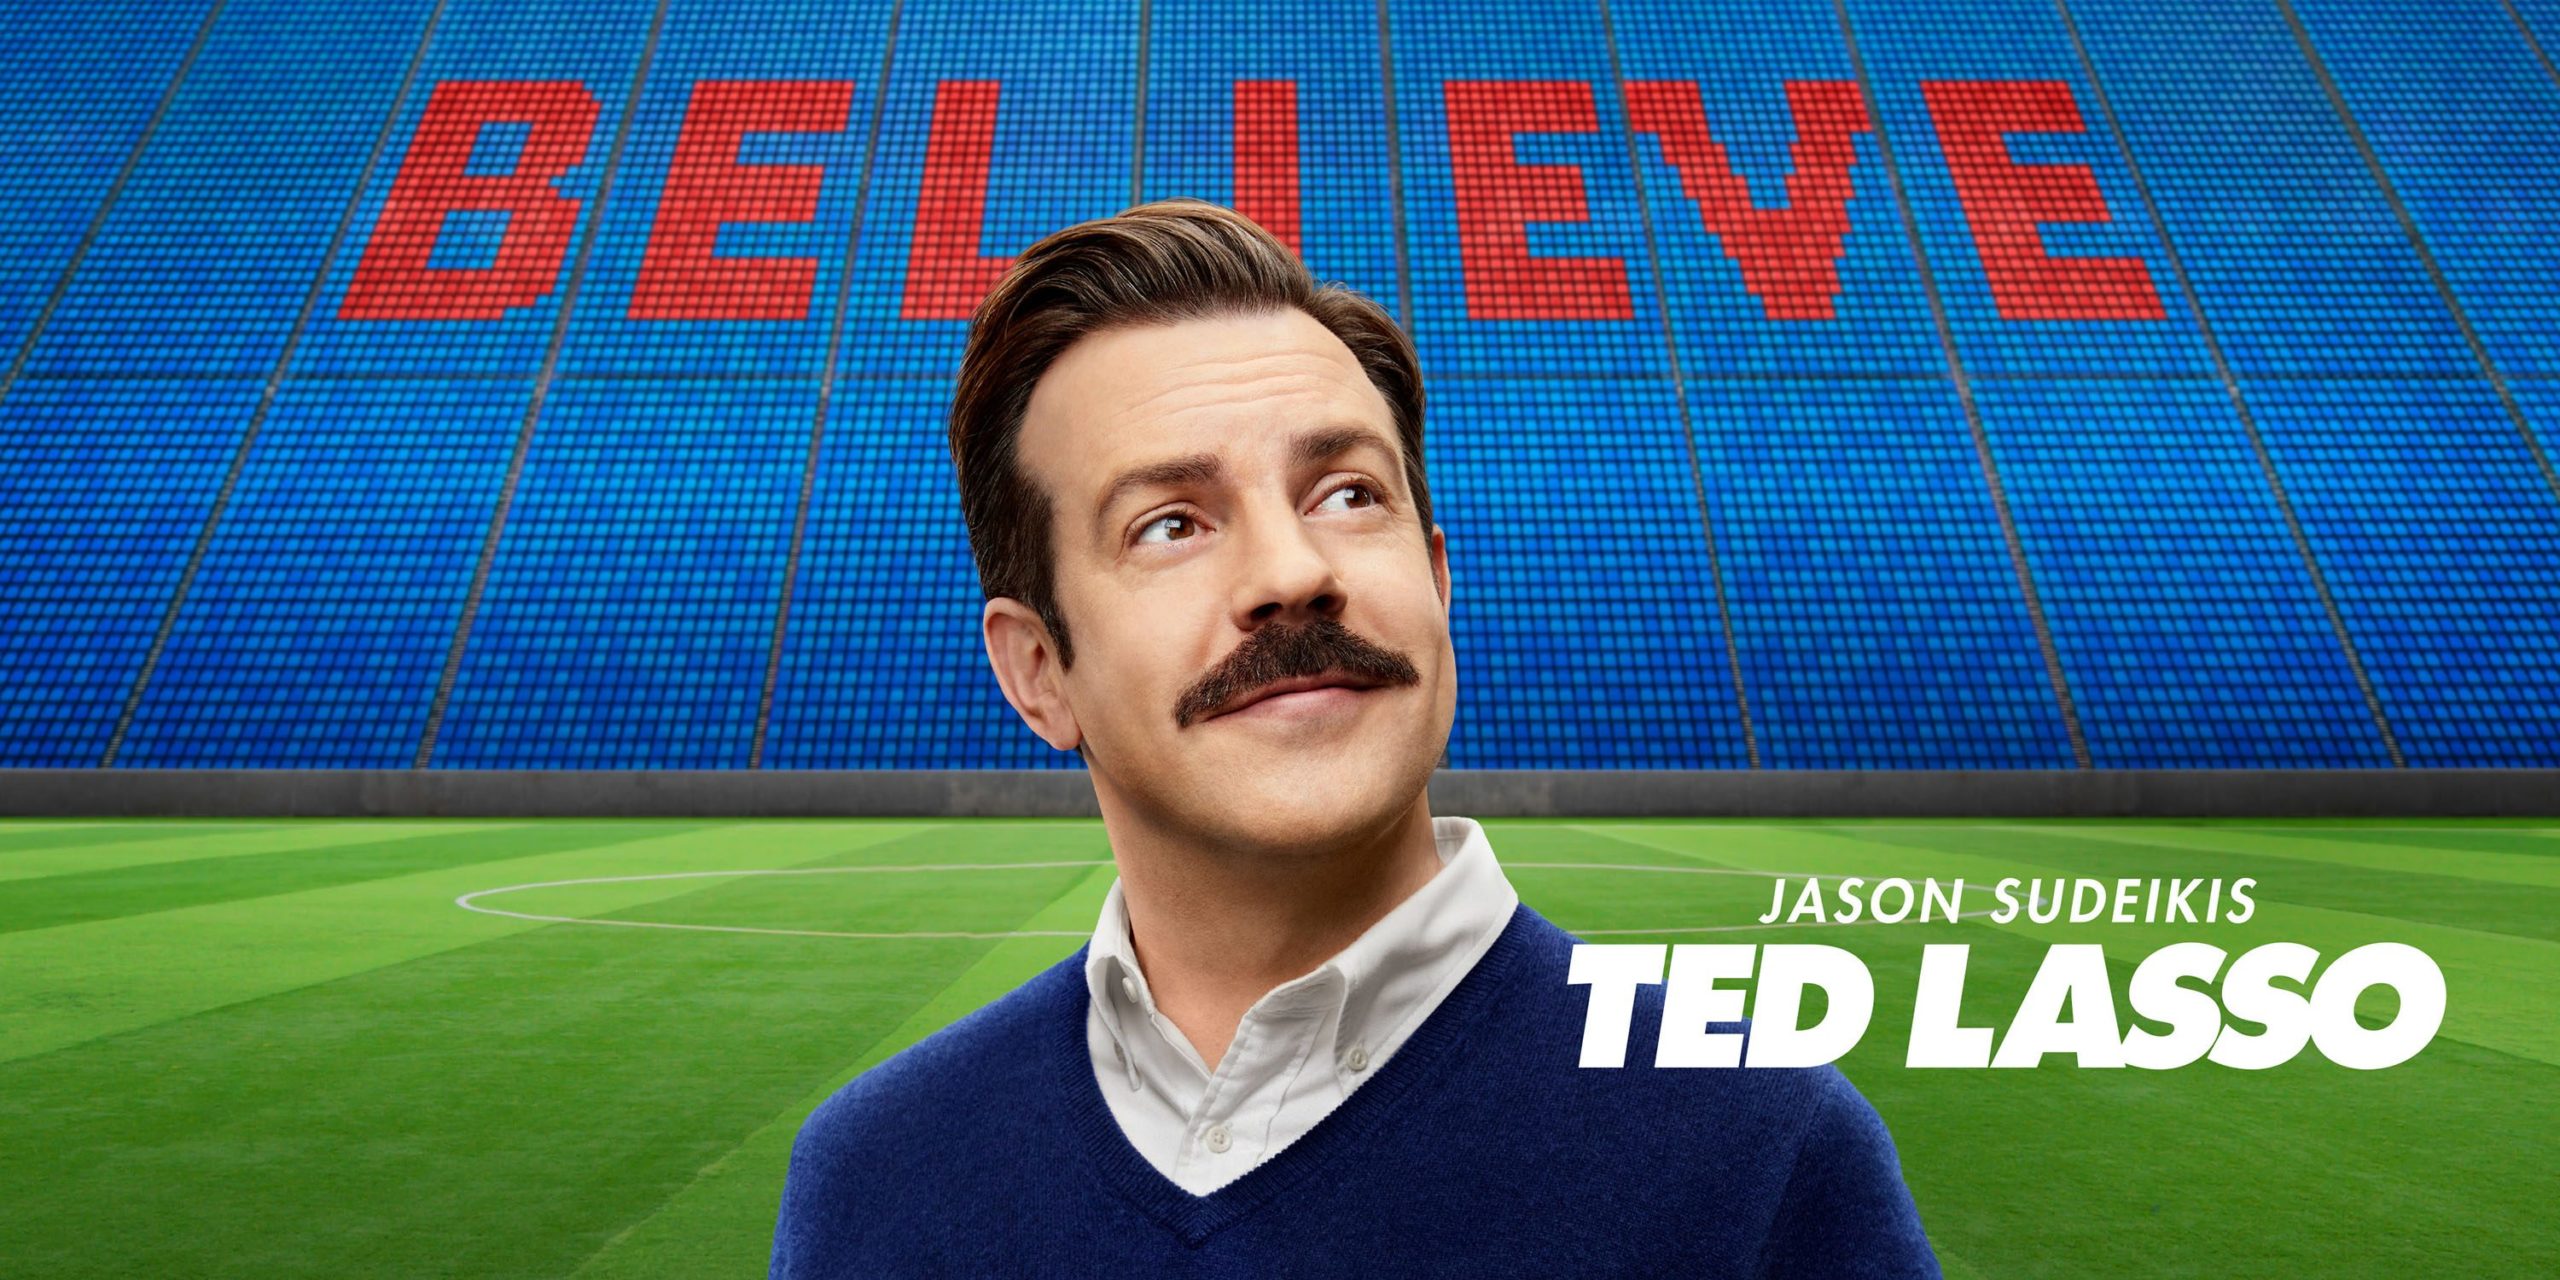 Jason Sudeikis Emmys 2021 Here’s the Pep Talk Ted Lasso Would Give!